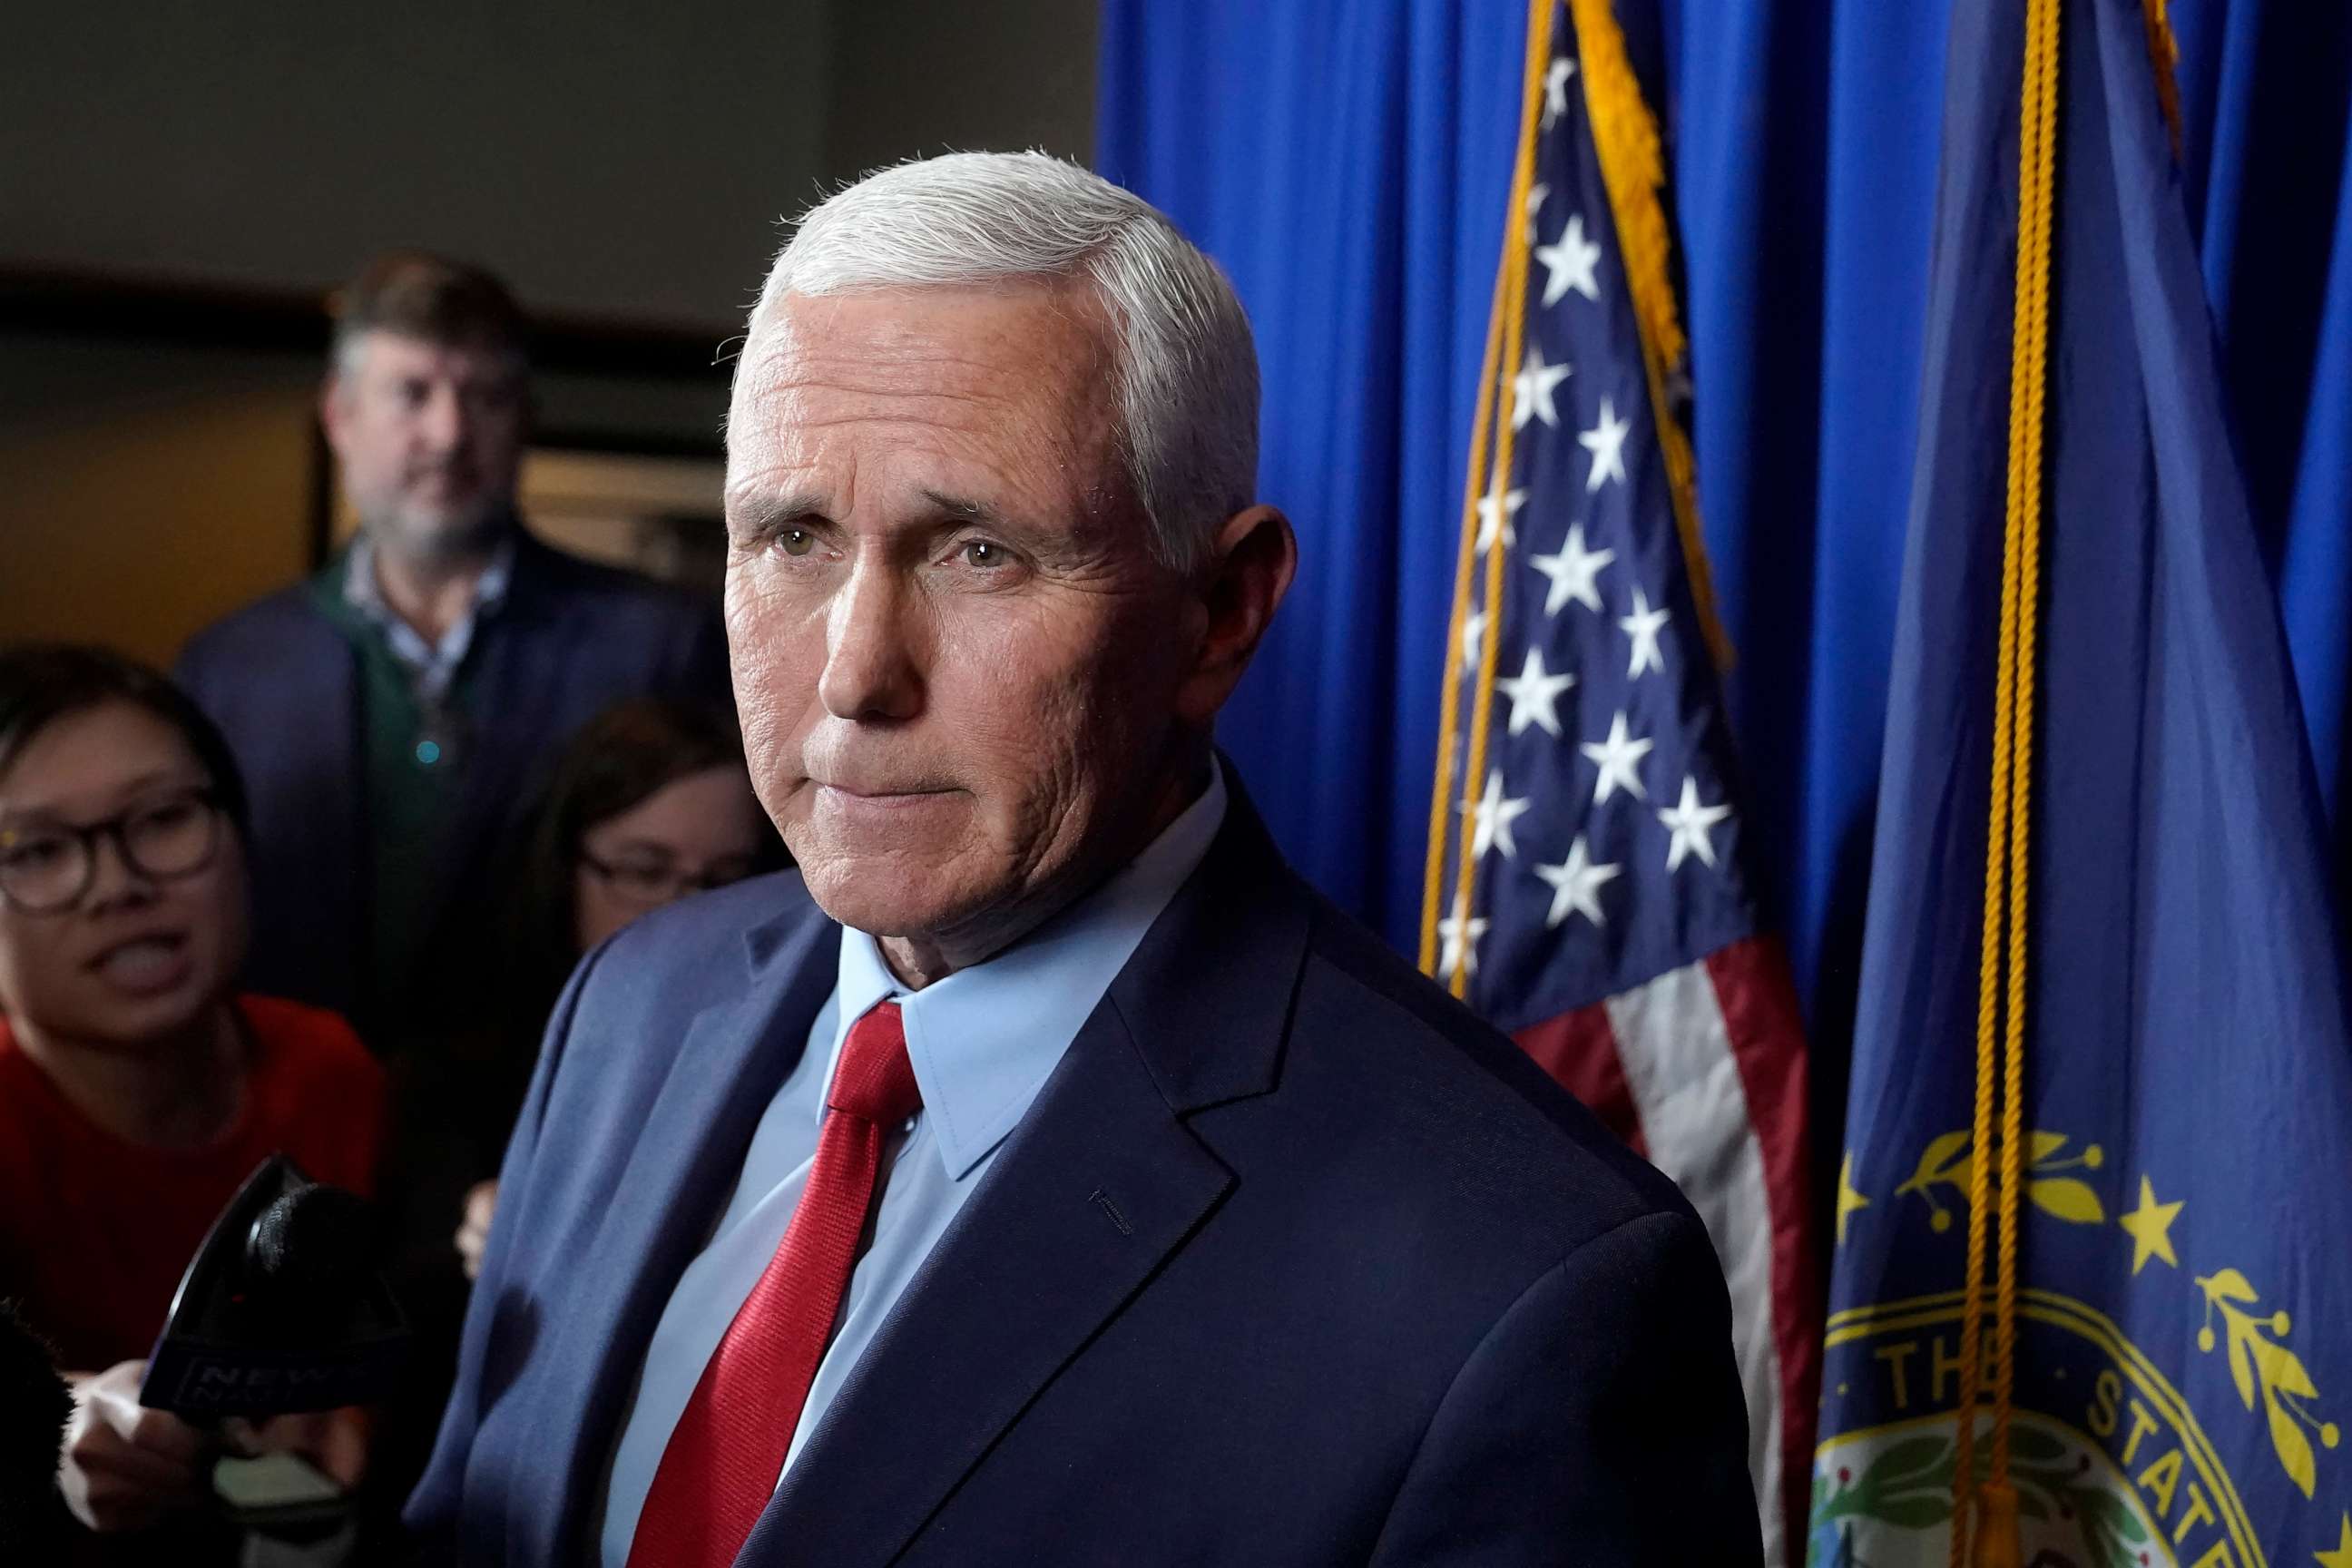 PHOTO: Former Vice President Mike Pence faces reporters after making remarks at a GOP fundraising dinner, March 16, 2023, in Keene, N.H.